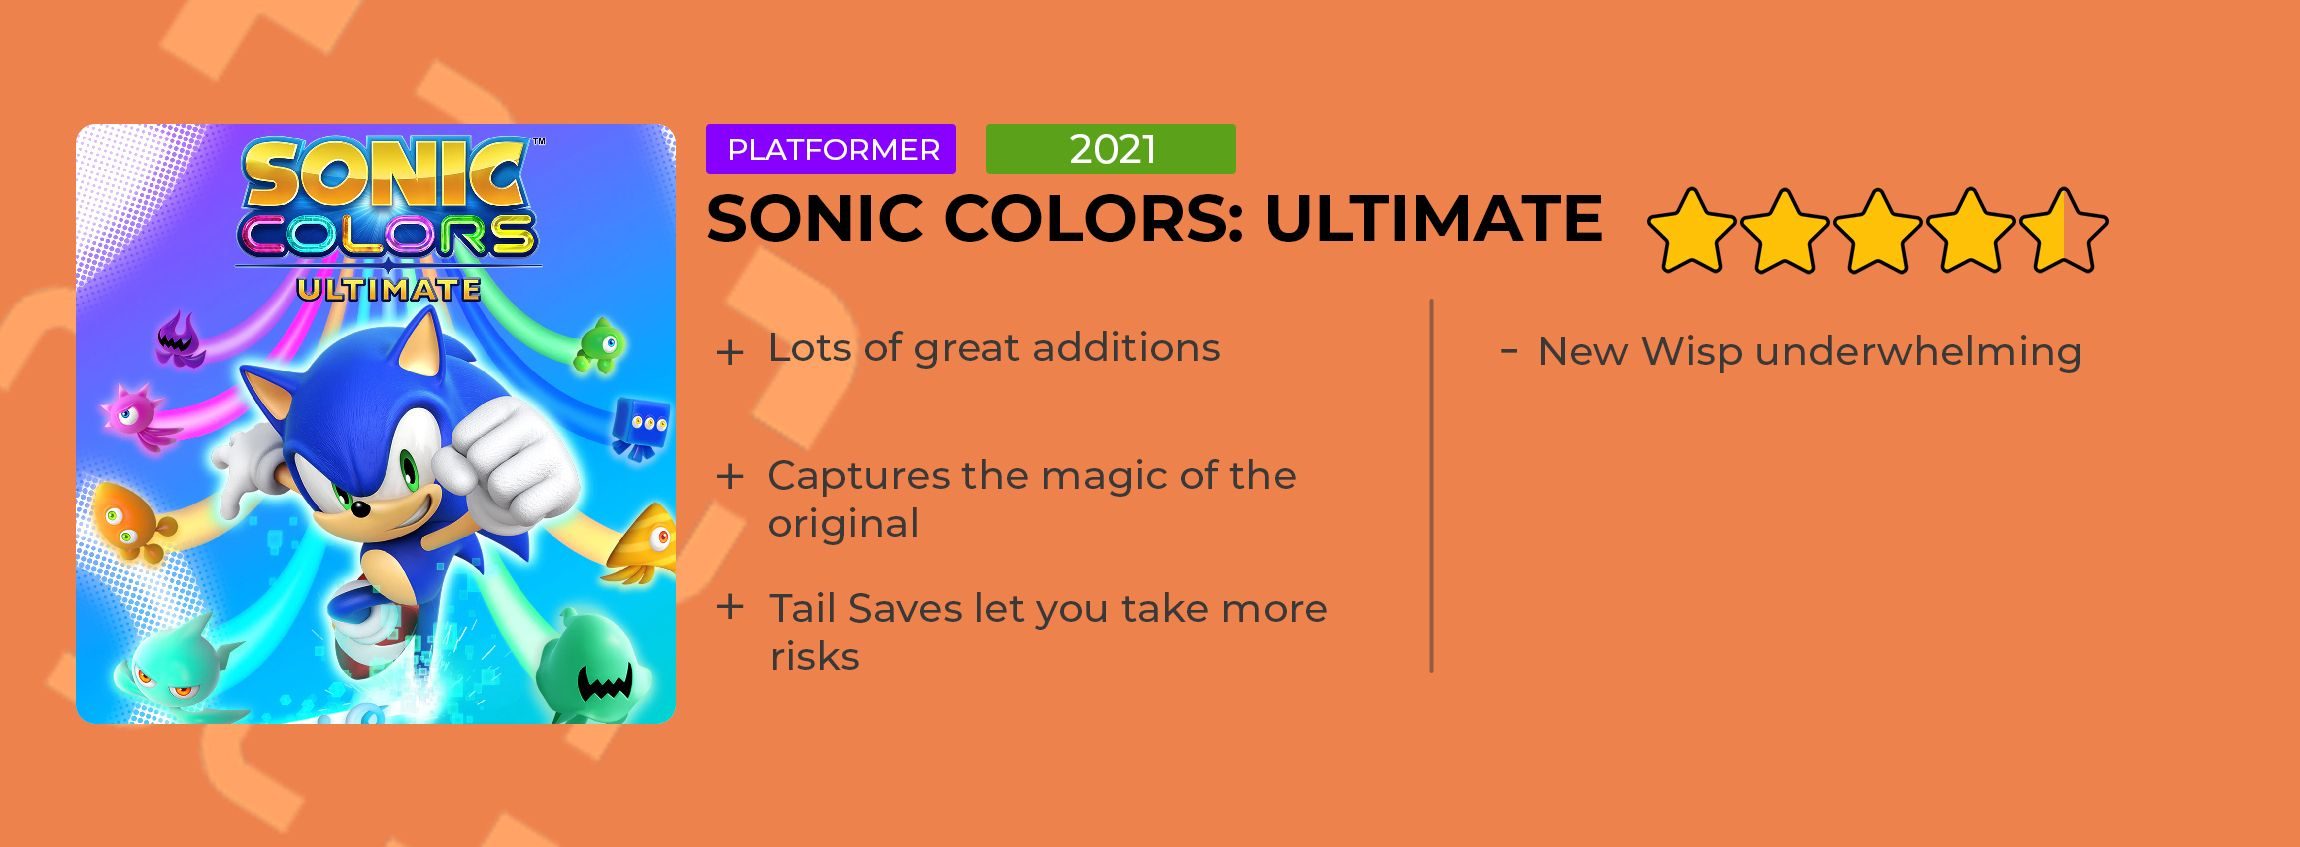 sonic-colors-ultimate-review-card-4859760